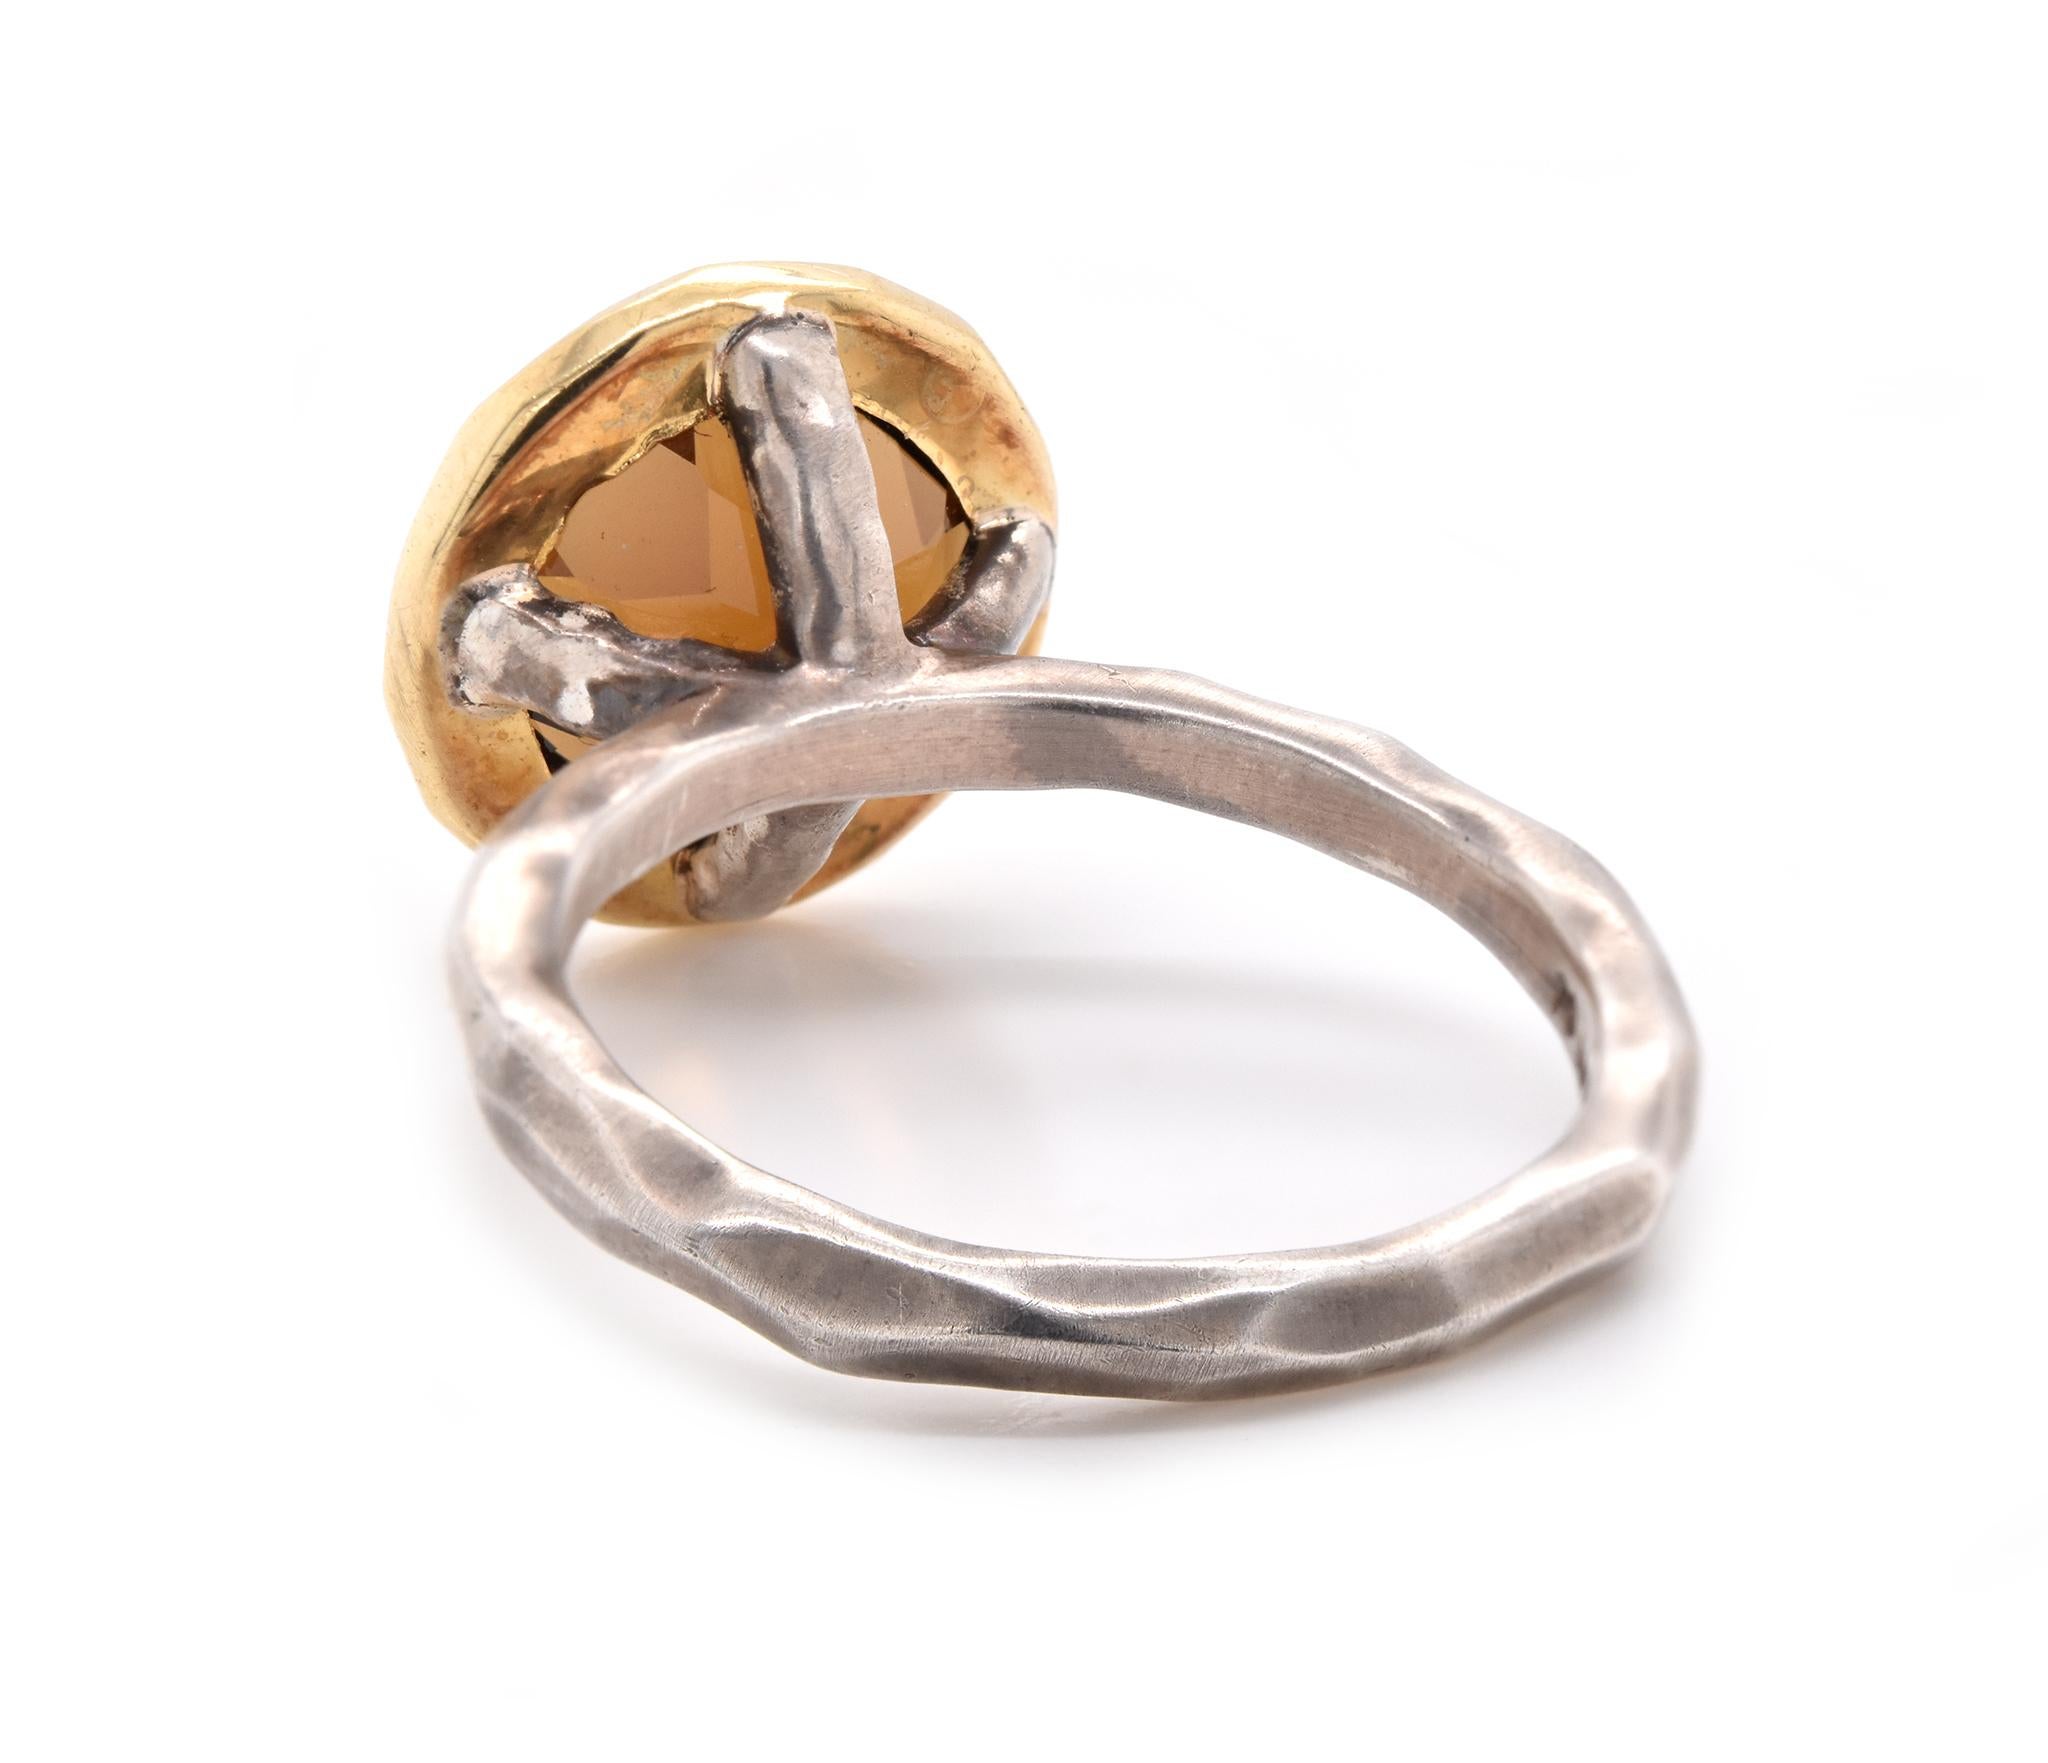 18 Karat Yellow Gold and Sterling Silver Cognac Quartz Ring In Excellent Condition For Sale In Scottsdale, AZ